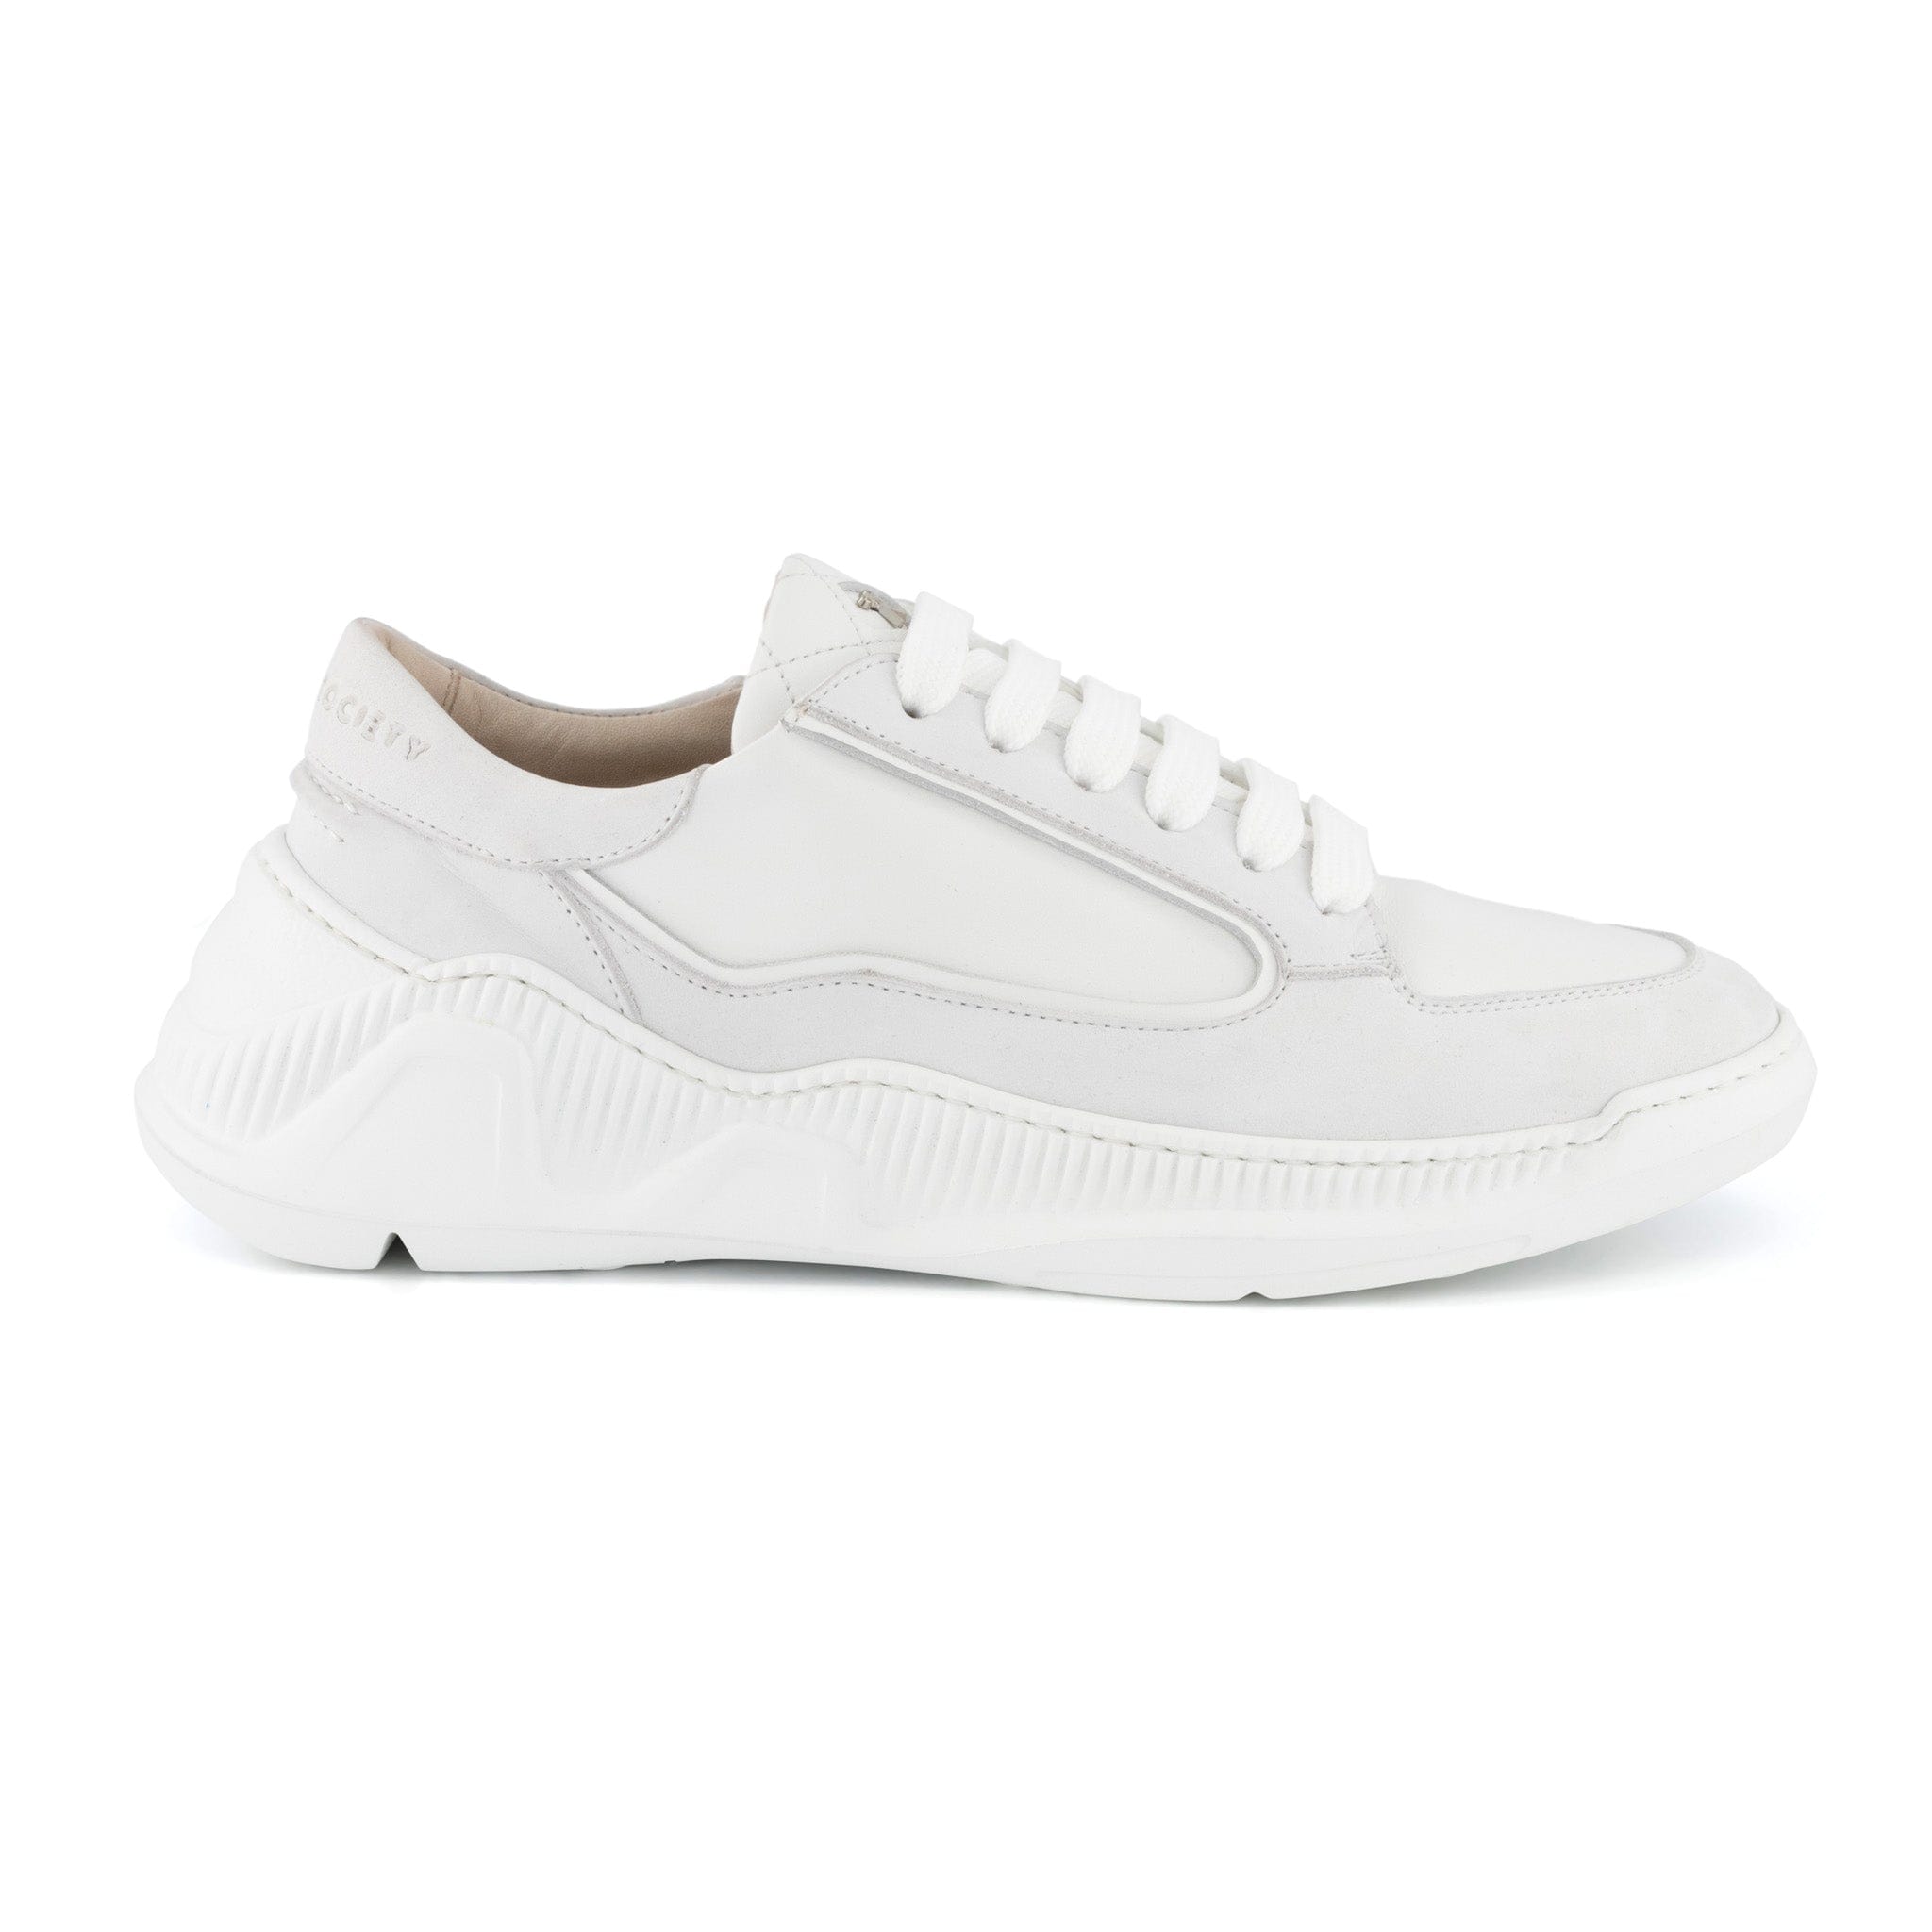 Nesto Low Top Italian Leather Sneaker | All White | White Outsole | Made in Italy